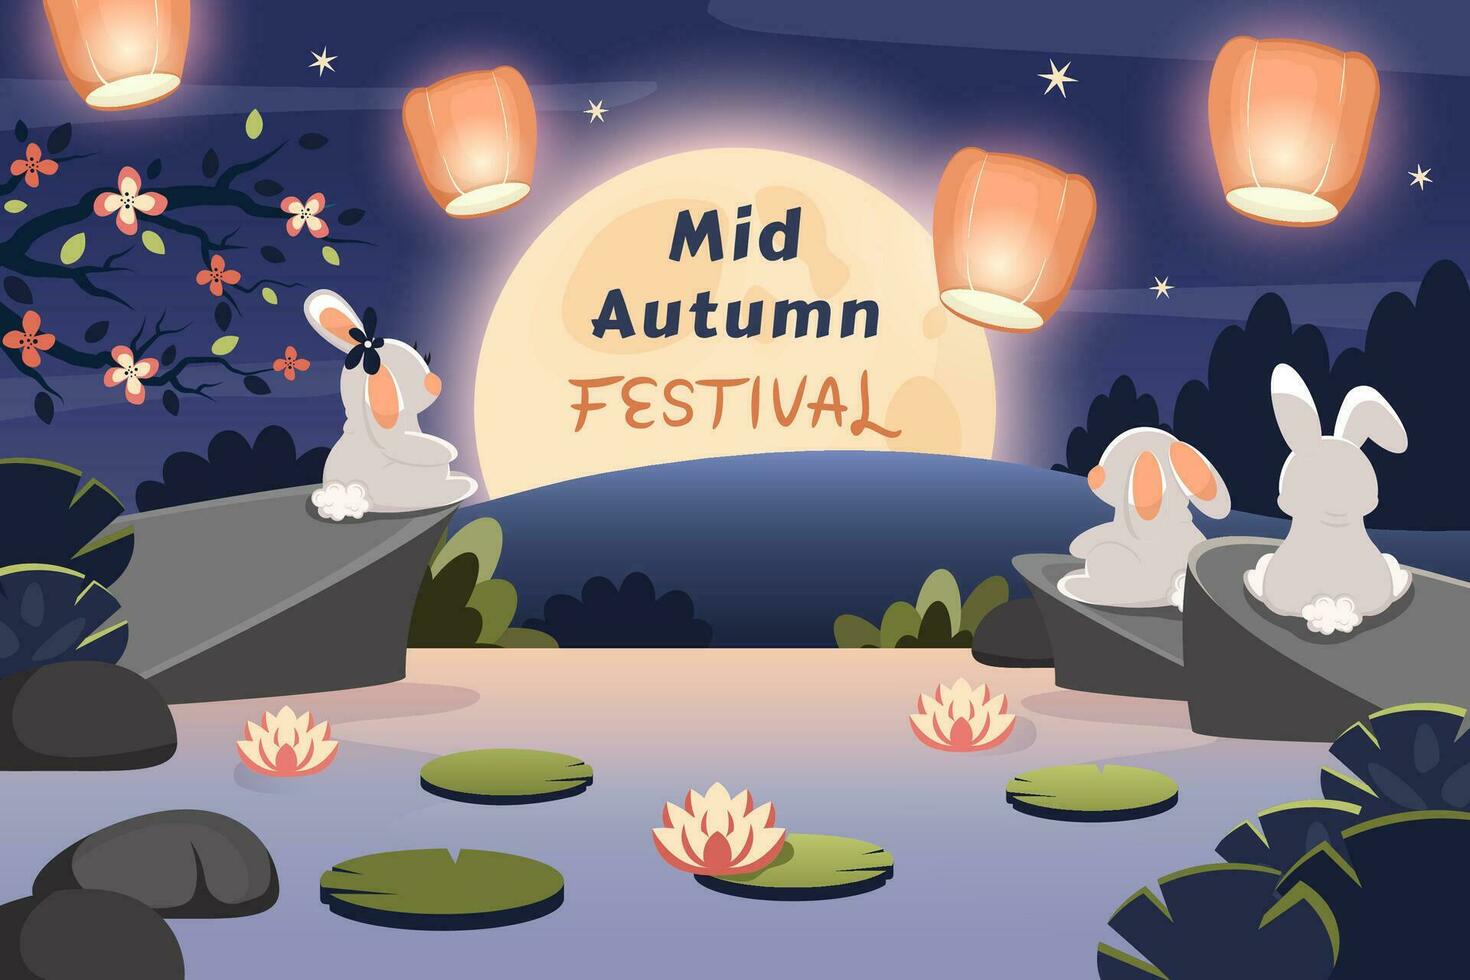 Happy Mid Autumn Festival. Cute rabbits looking at moon and Chinese lanterns. Greeting card with text for mooncake festival, Chinese, Korean, Asian traditional holiday. Vector cartoon illustration